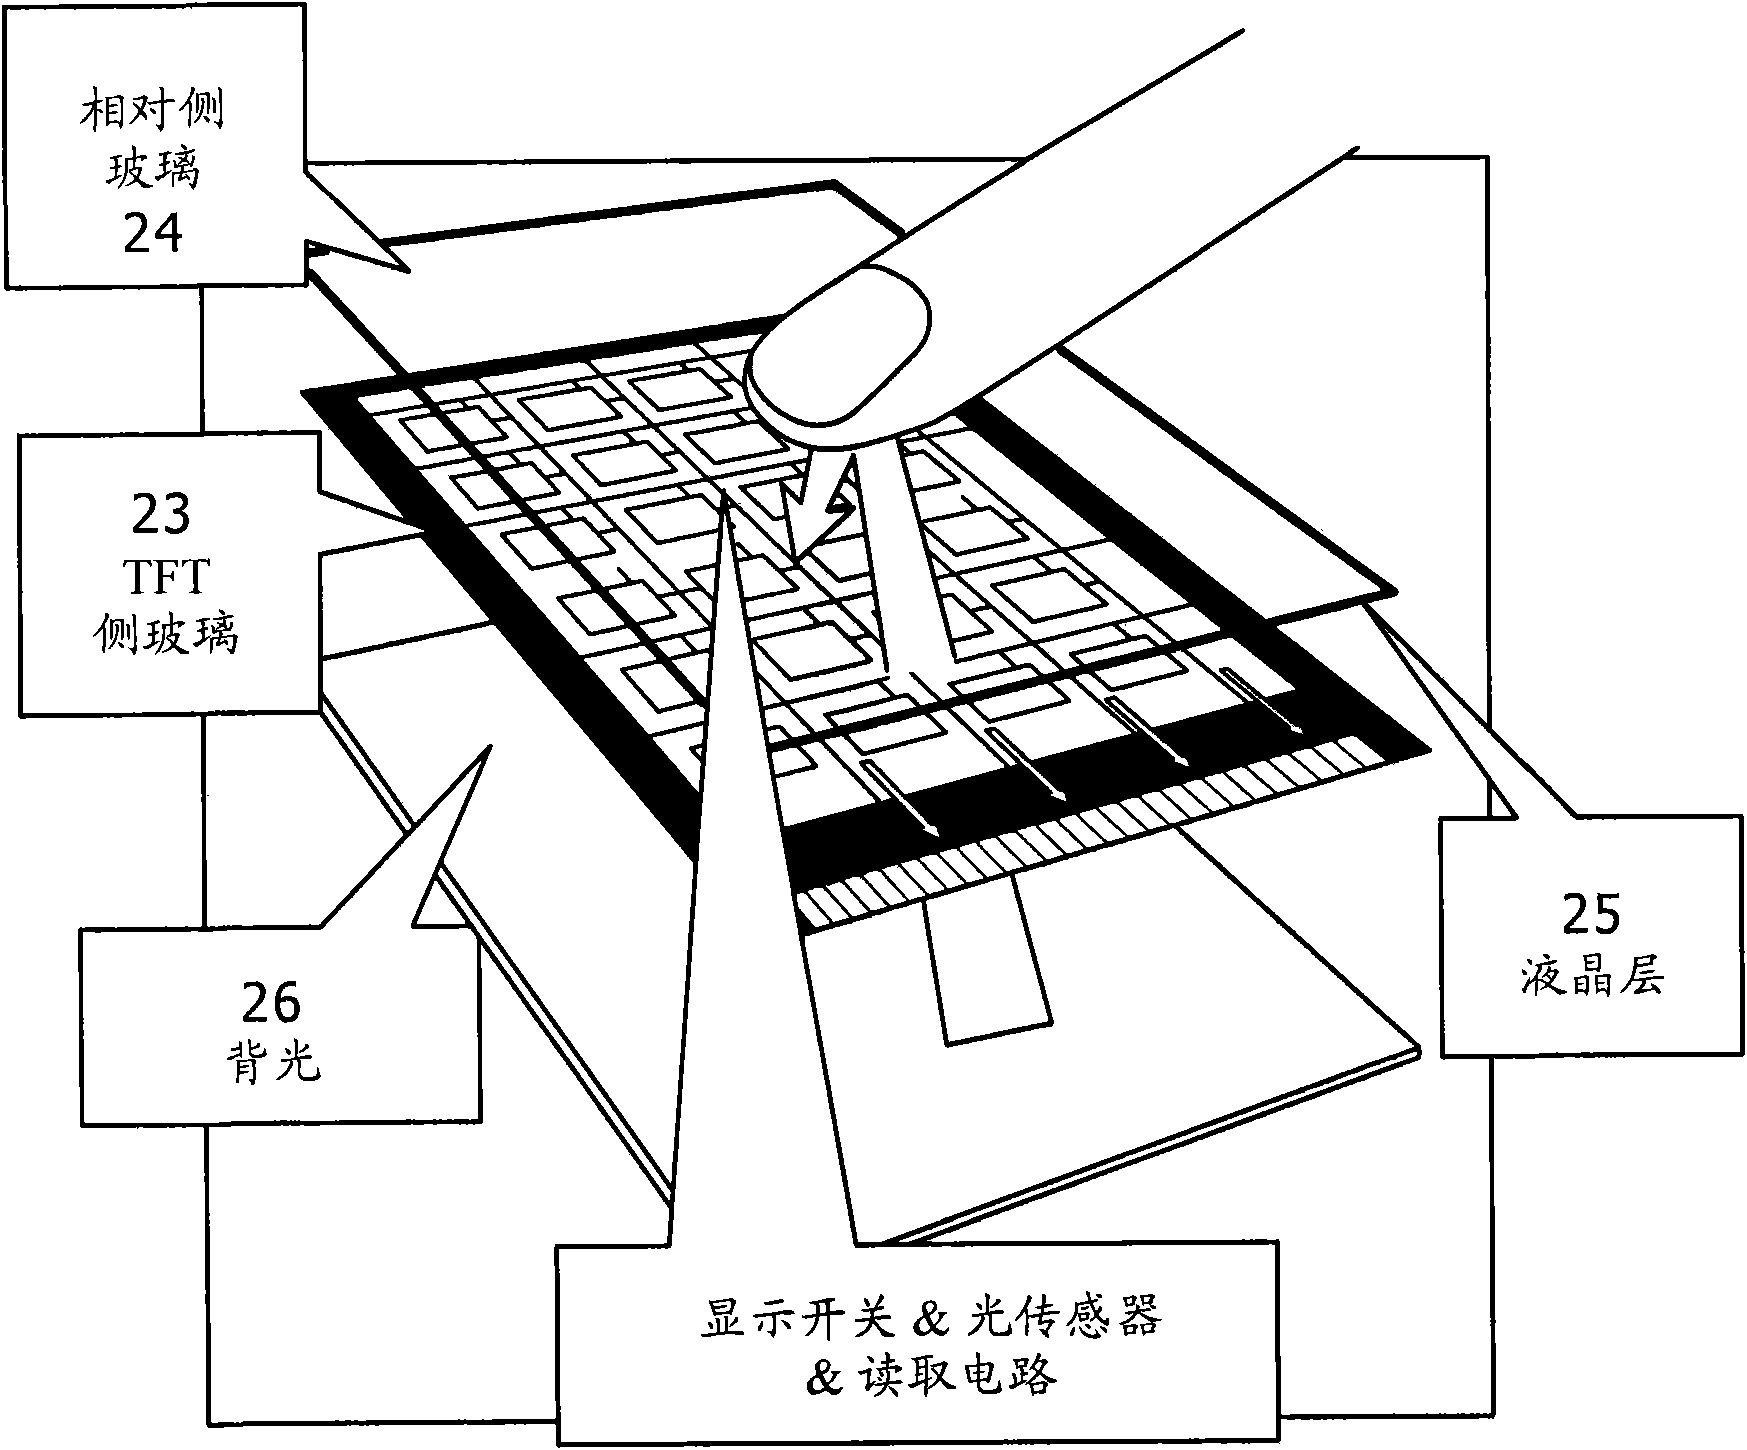 Display and electronic apparatus